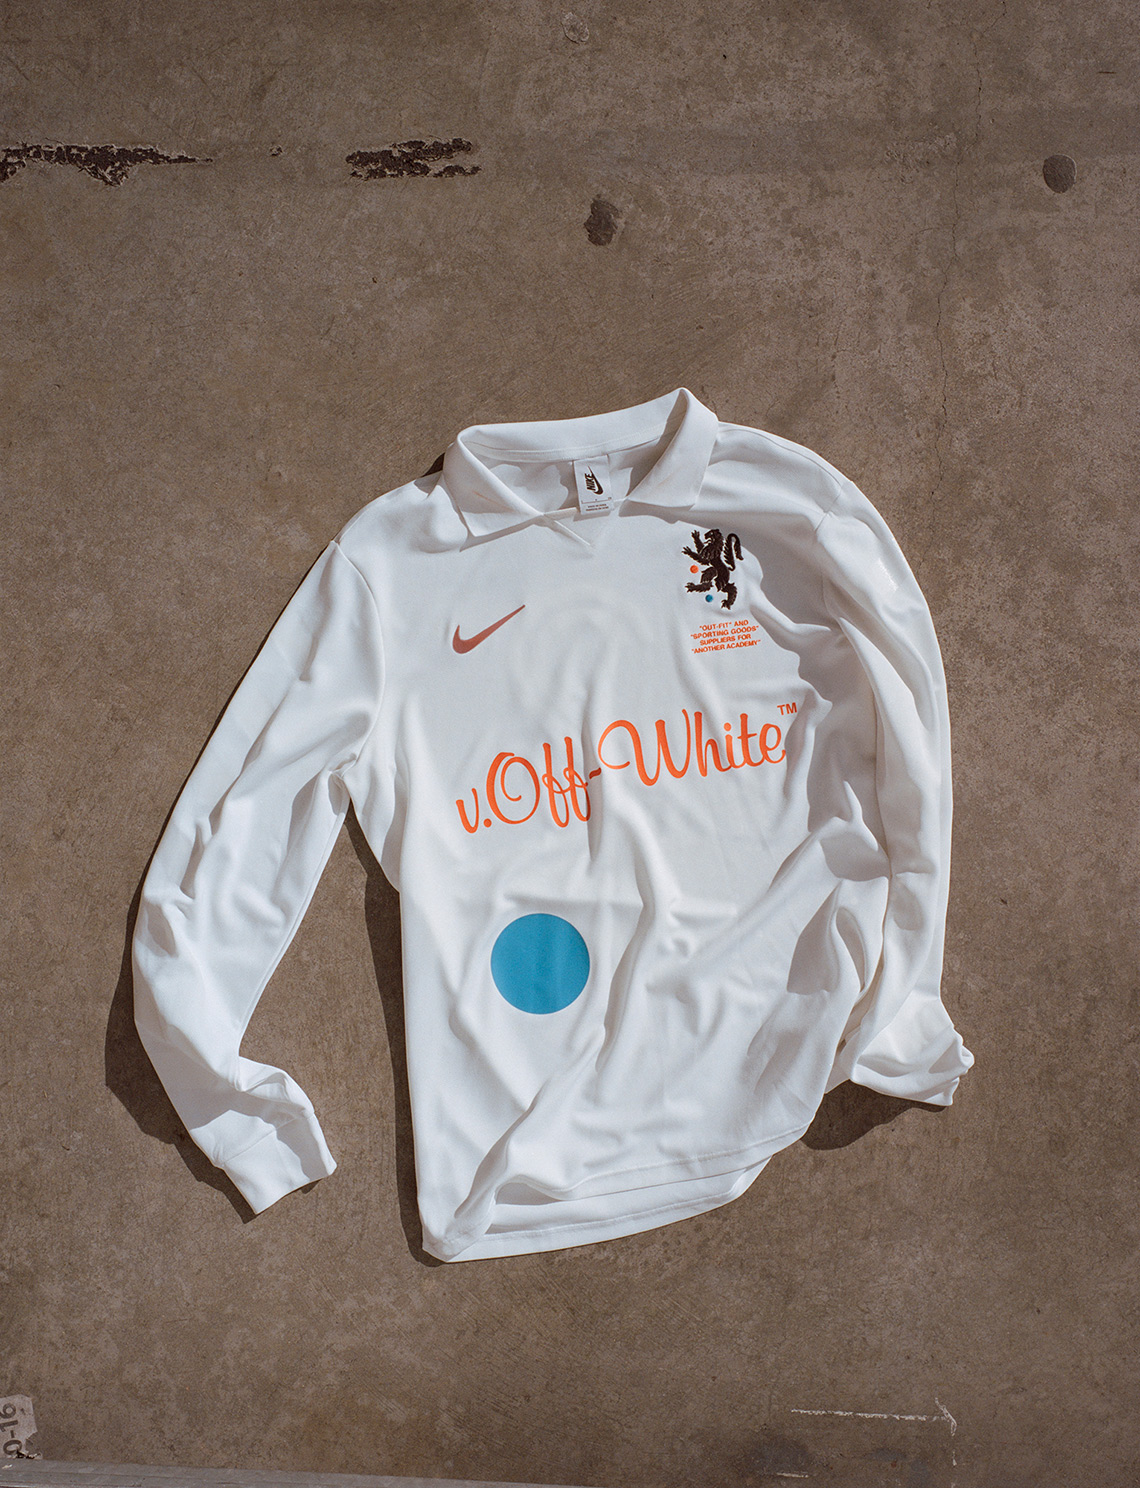 Off White Nike Virgil Abloh Soccer Football Mon Amour Collection 21